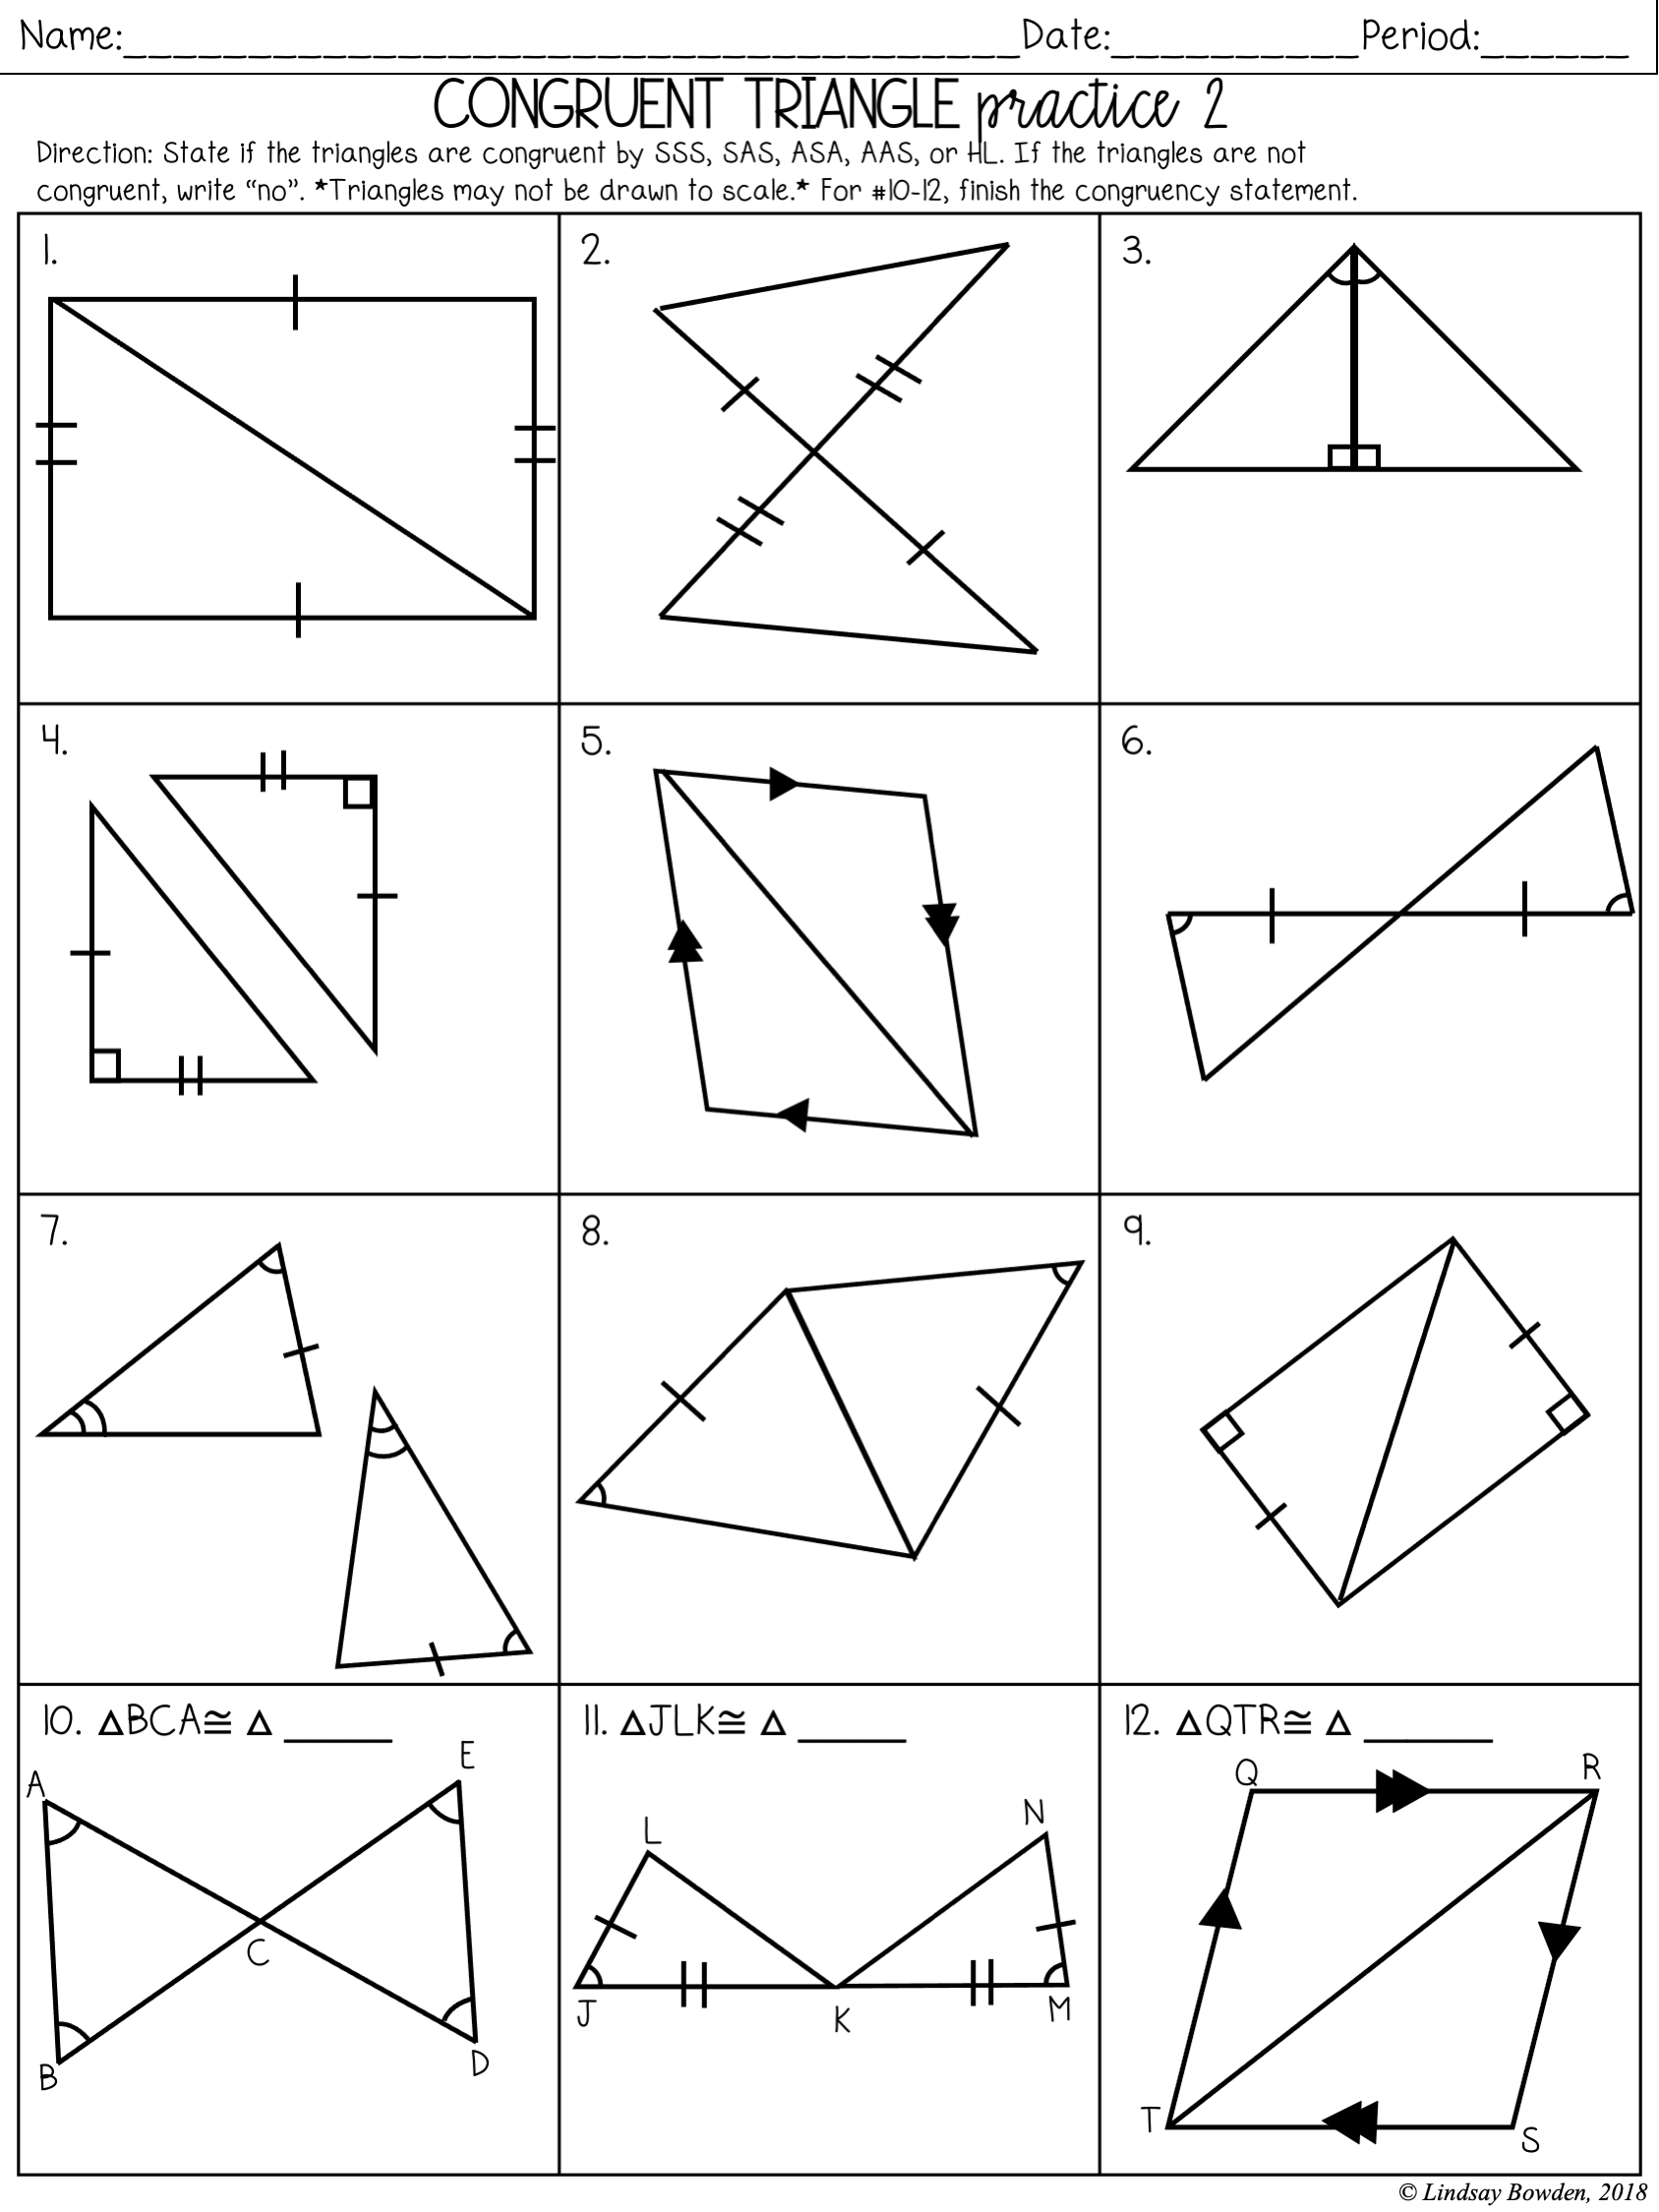 Congruent Triangles Notes and Worksheets - Lindsay Bowden Regarding Congruent Triangles Worksheet With Answers